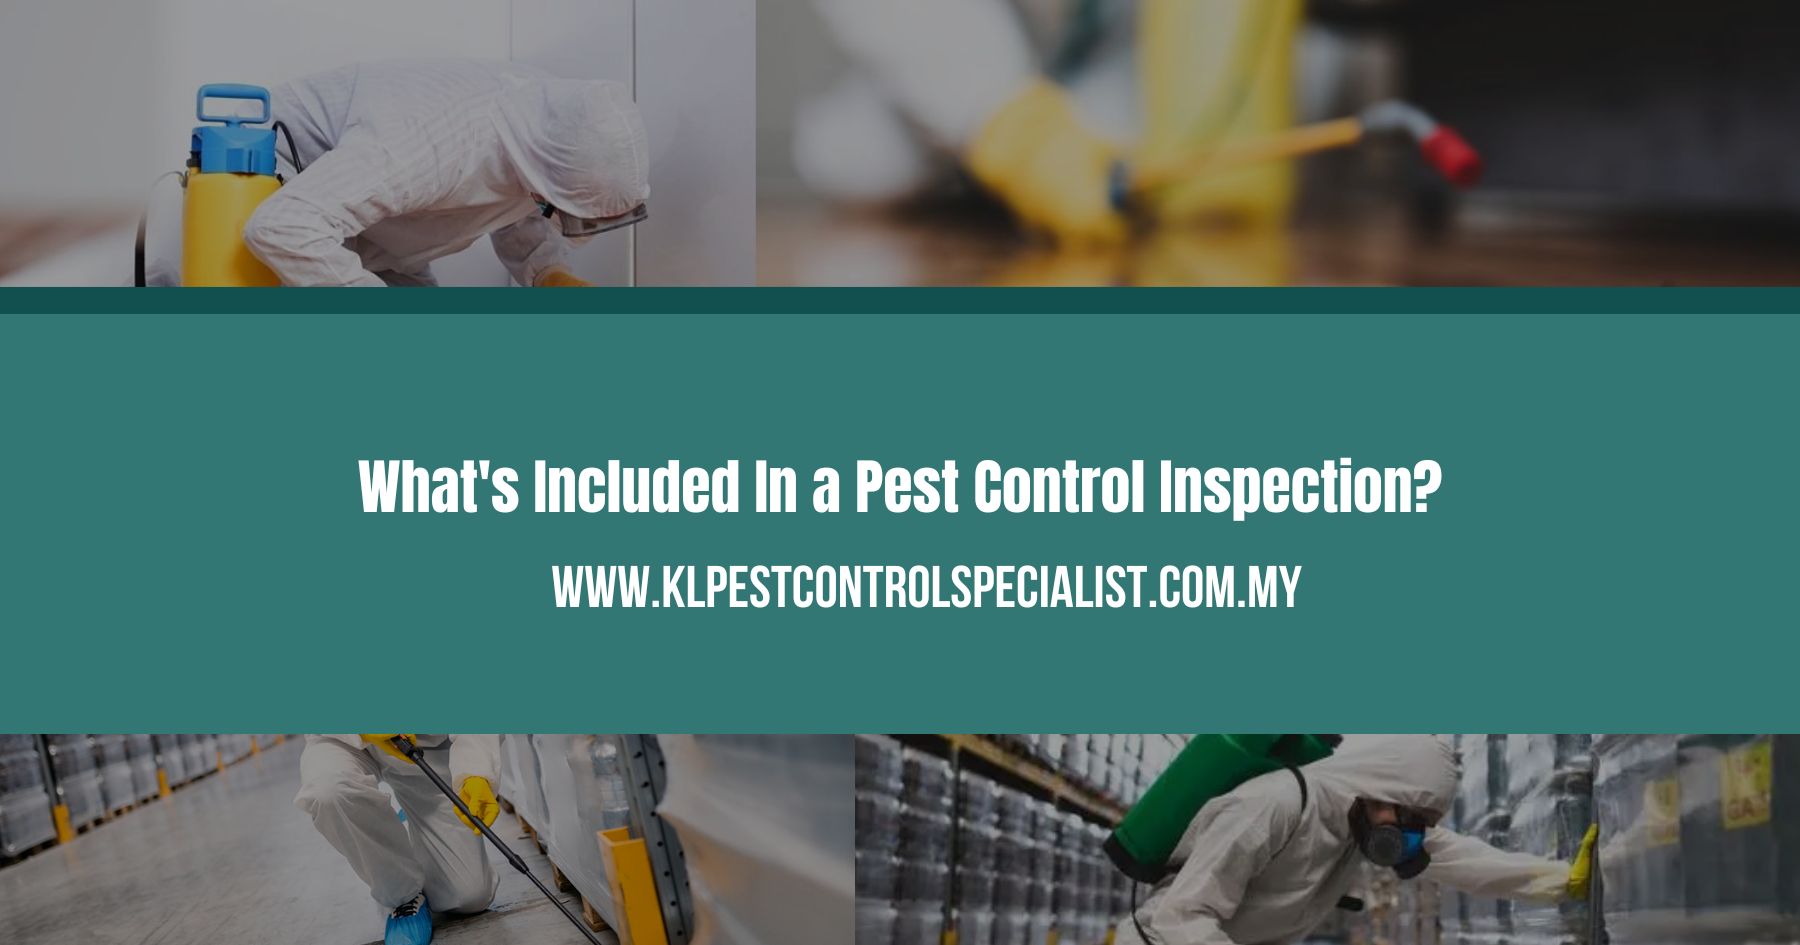 What's Included In a Pest Control Inspection